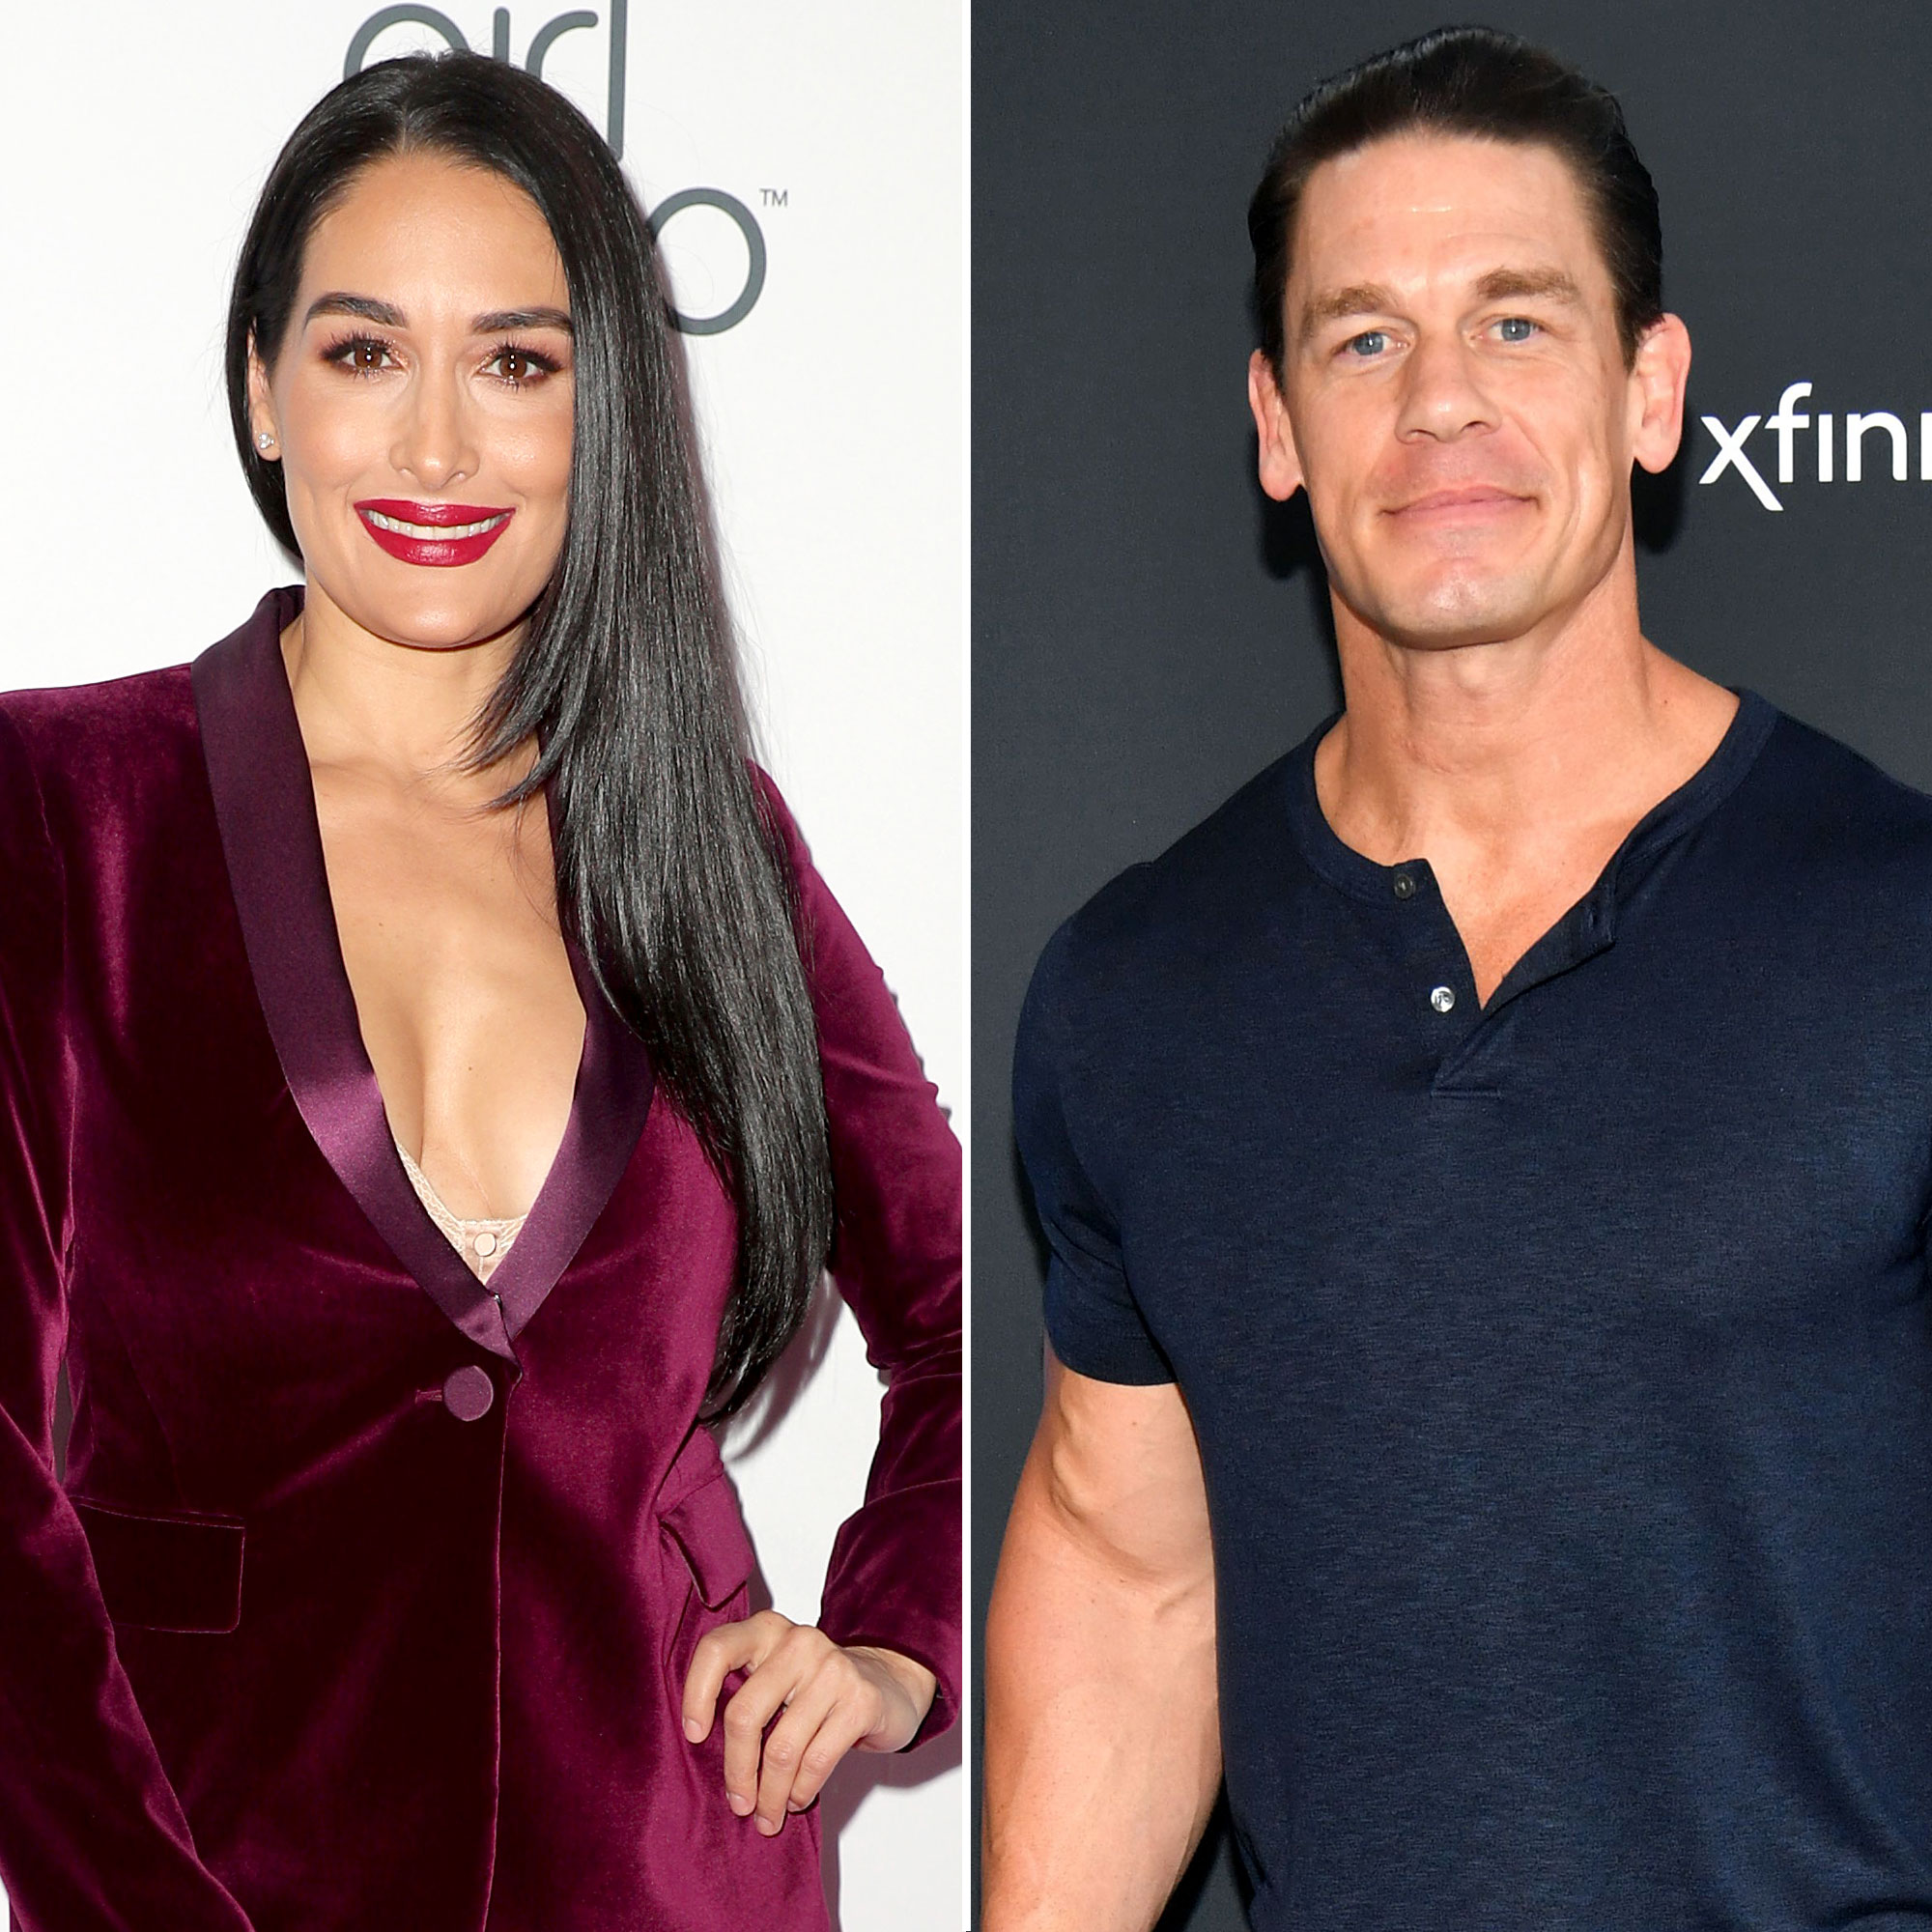 8 men WWE Hall of Famers Brie and Nikki Bella have dated in real life